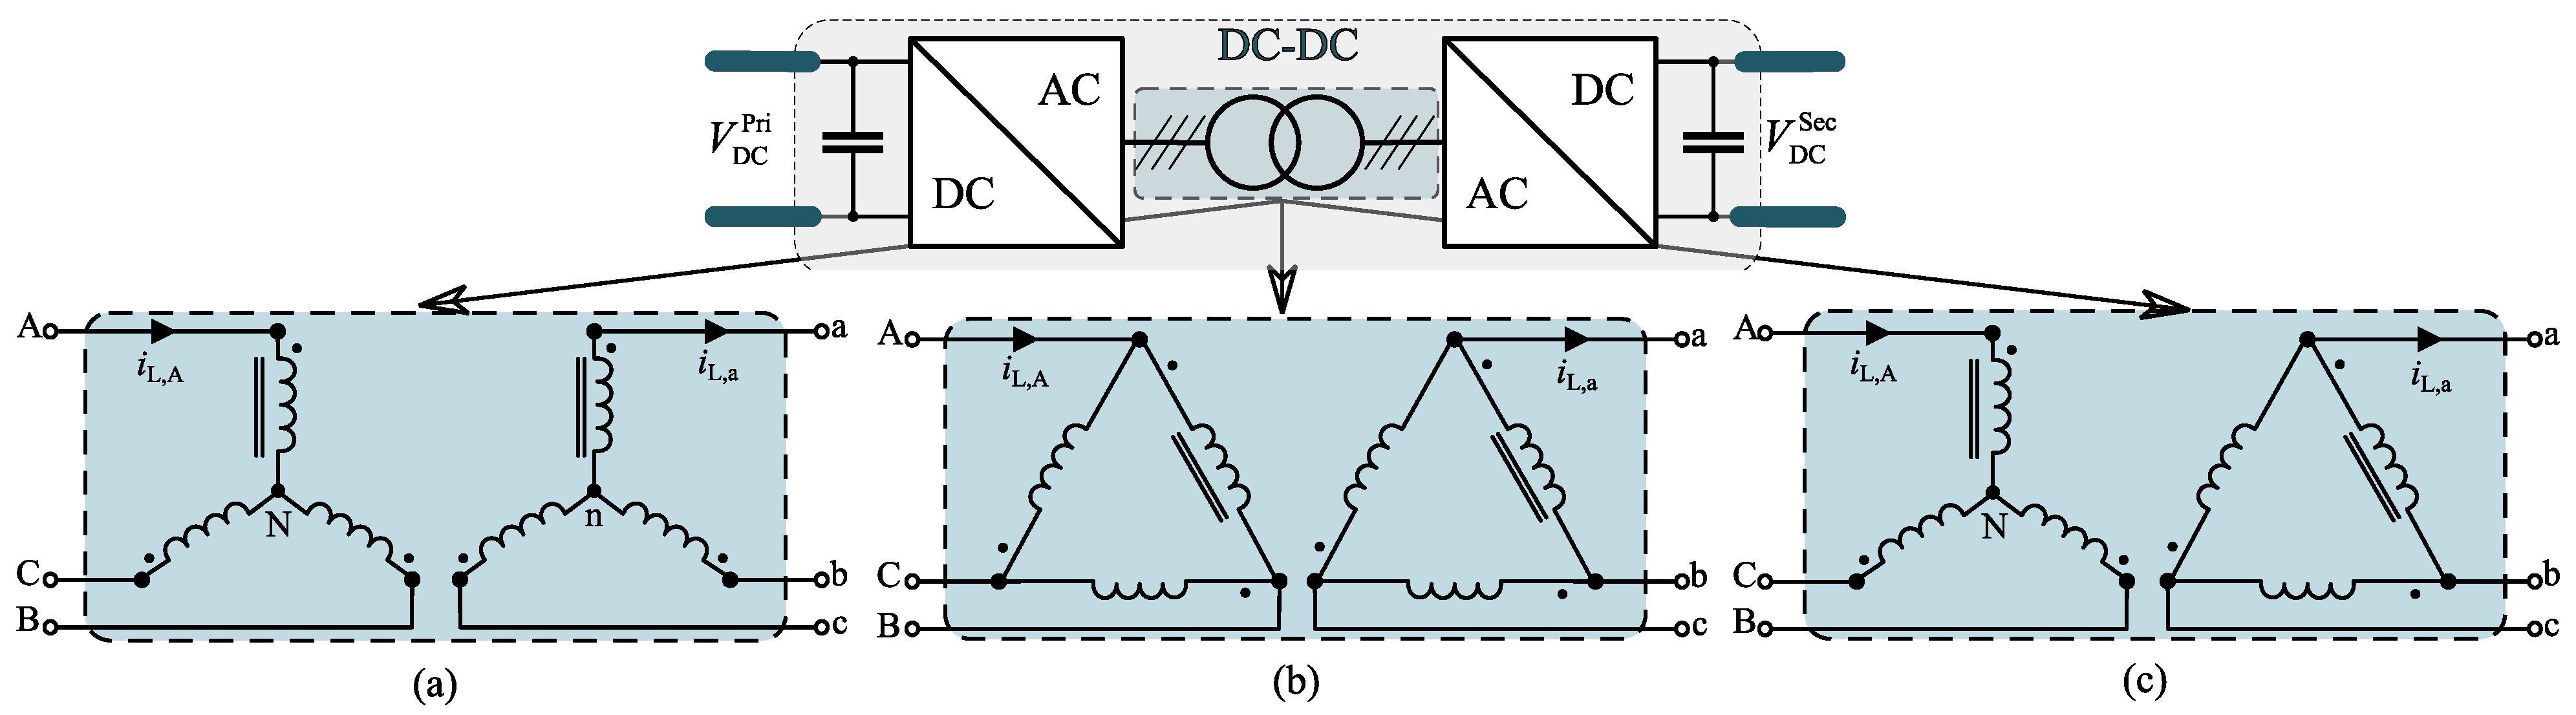 Energies | Free Full-Text | Multilevel Dual Active Bridge Leakage  Inductance Selection for Various DC-Link Voltage Spans